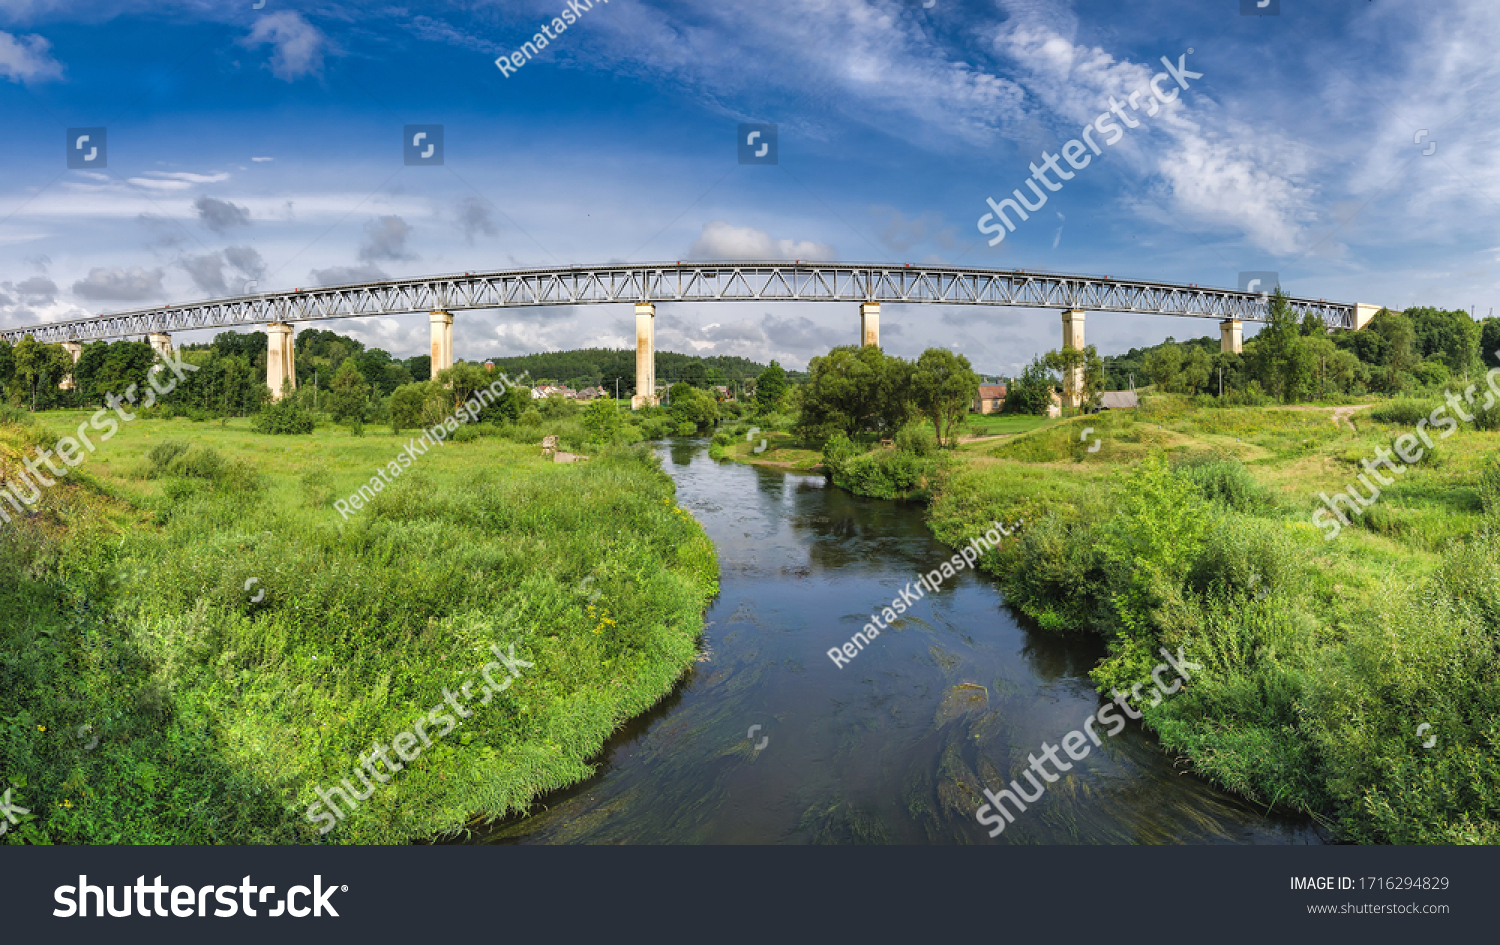 The Lyduvėnai Railway Bridge (Lithuanian: Lyduvėnų tiltas) is one of the longest bridges in Lithuania. It crosses the river Dubysa. It is located in Lyduvėnai, Raseiniai district. #1716294829